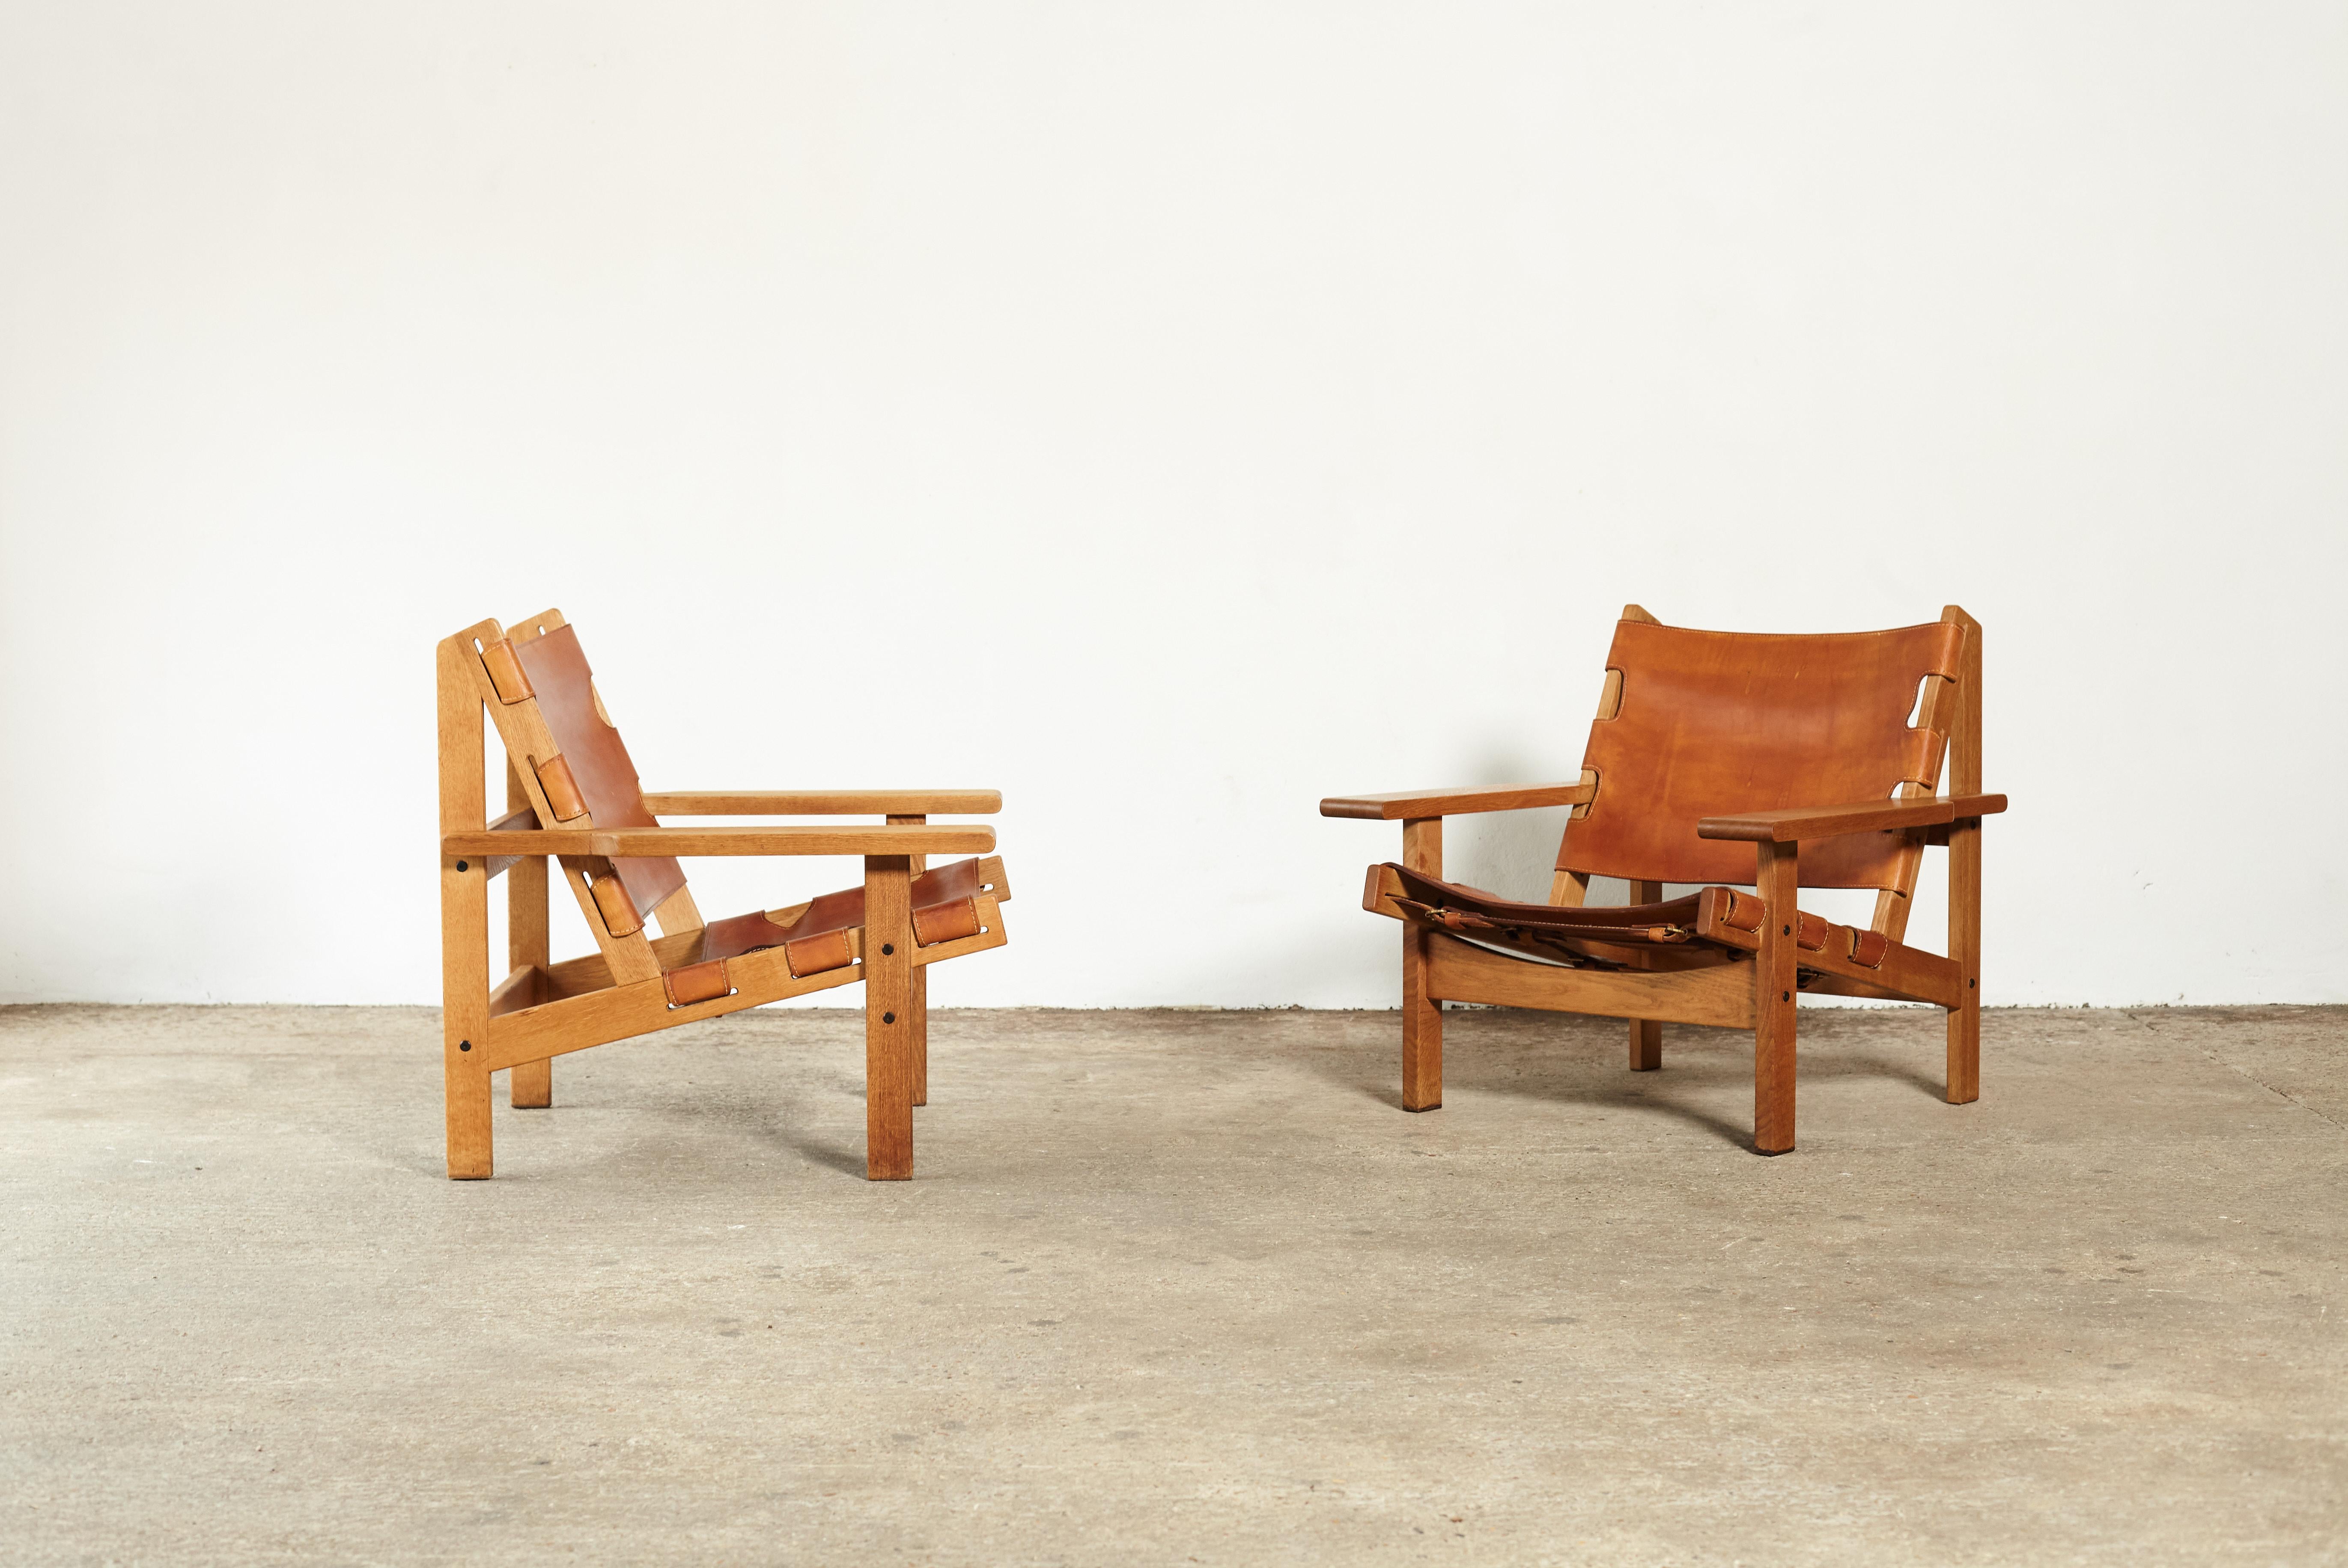 A super pair of rare Kurt Ostervig Hunting chairs (sometimes attributed to Erling Jessen), produced by K.P. Jørgensens Møbelfabrik, Denmark, 1960s. Solid oak and patinated cognac leather. Reminicent of Børge Mogensen's Spanish and Hunting chairs